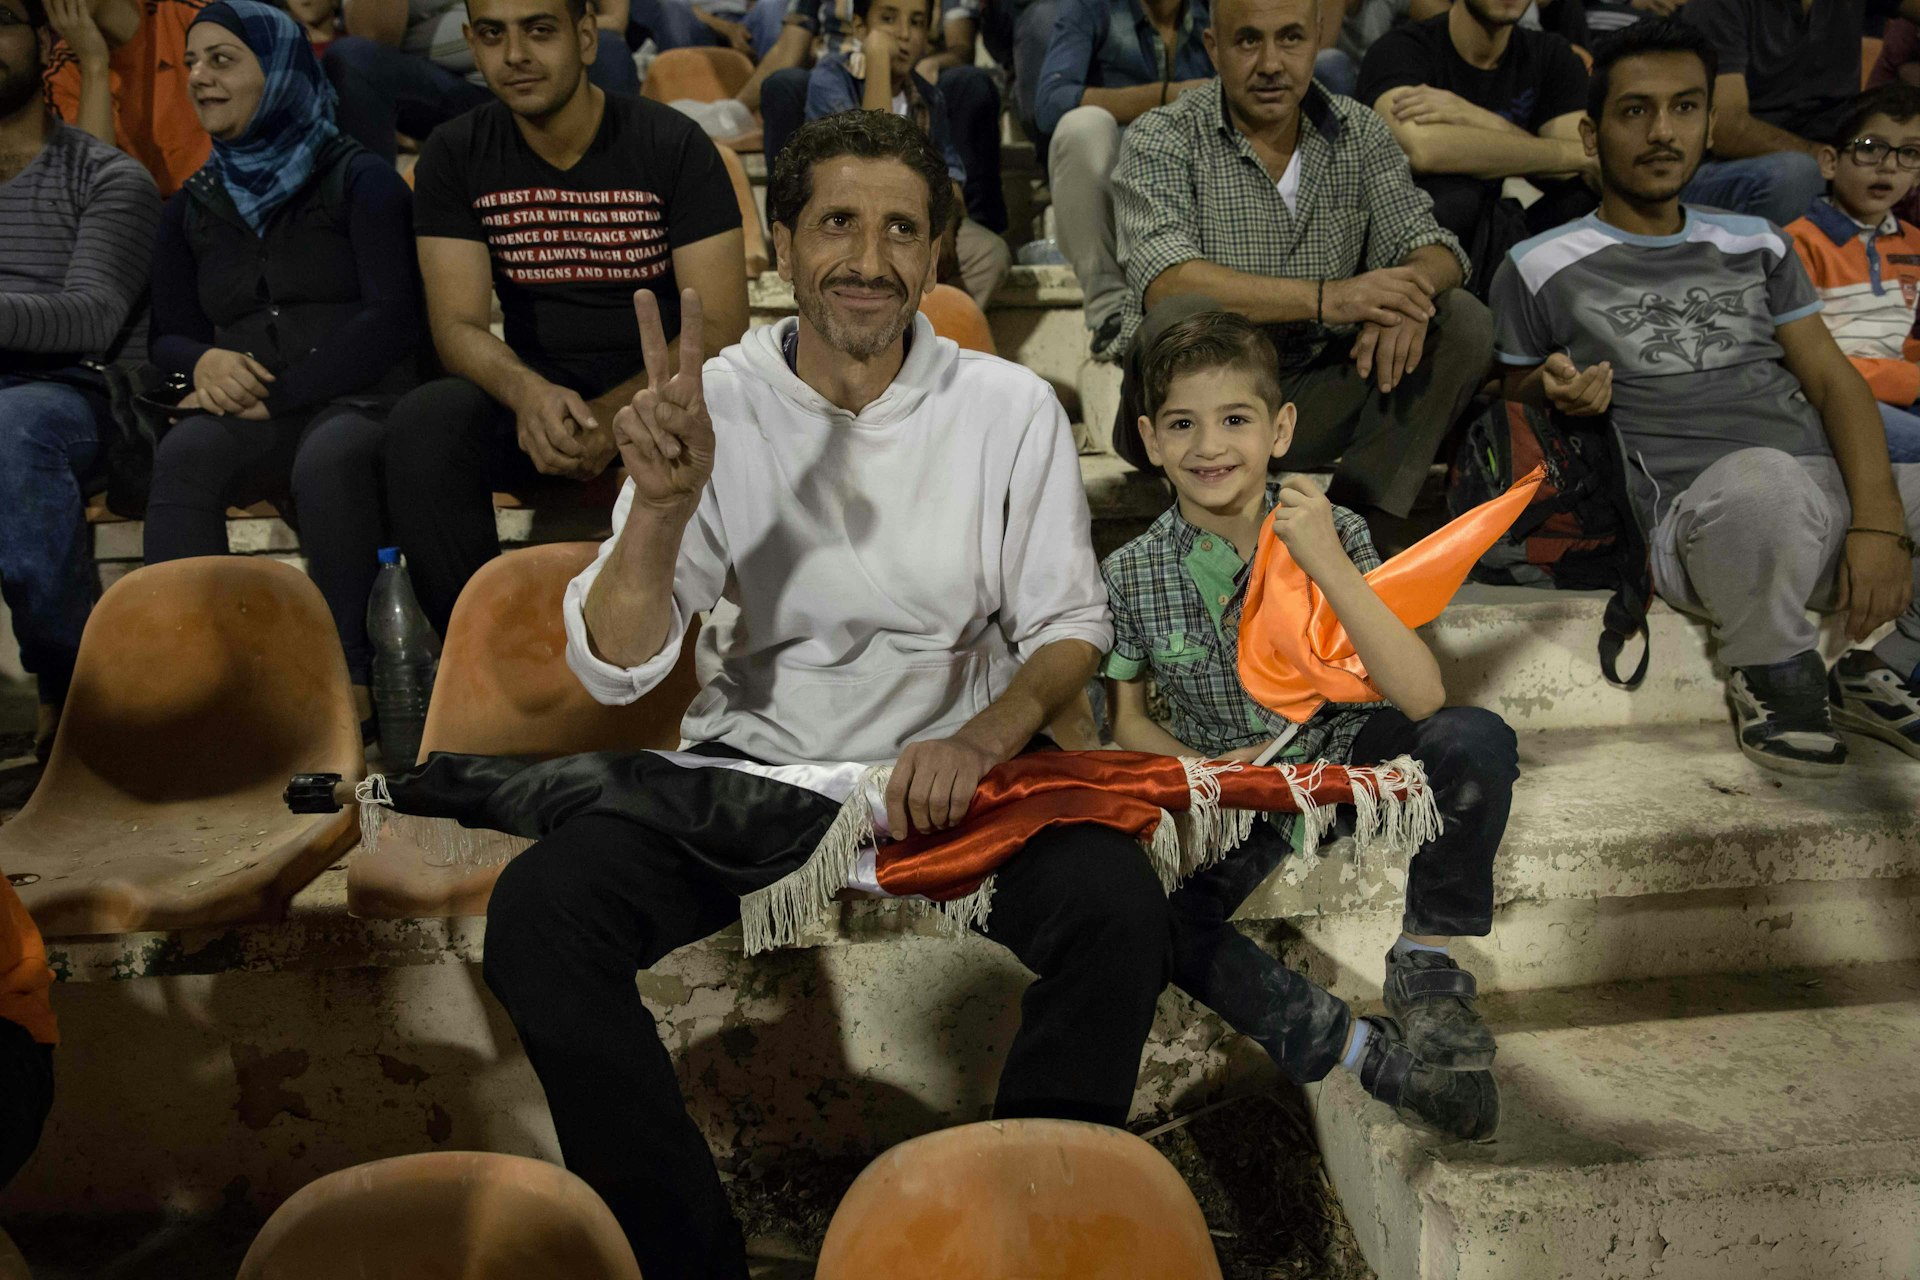 A father and son watch the match from the stands. Many parents said they are still too afraid to bring their children to games.